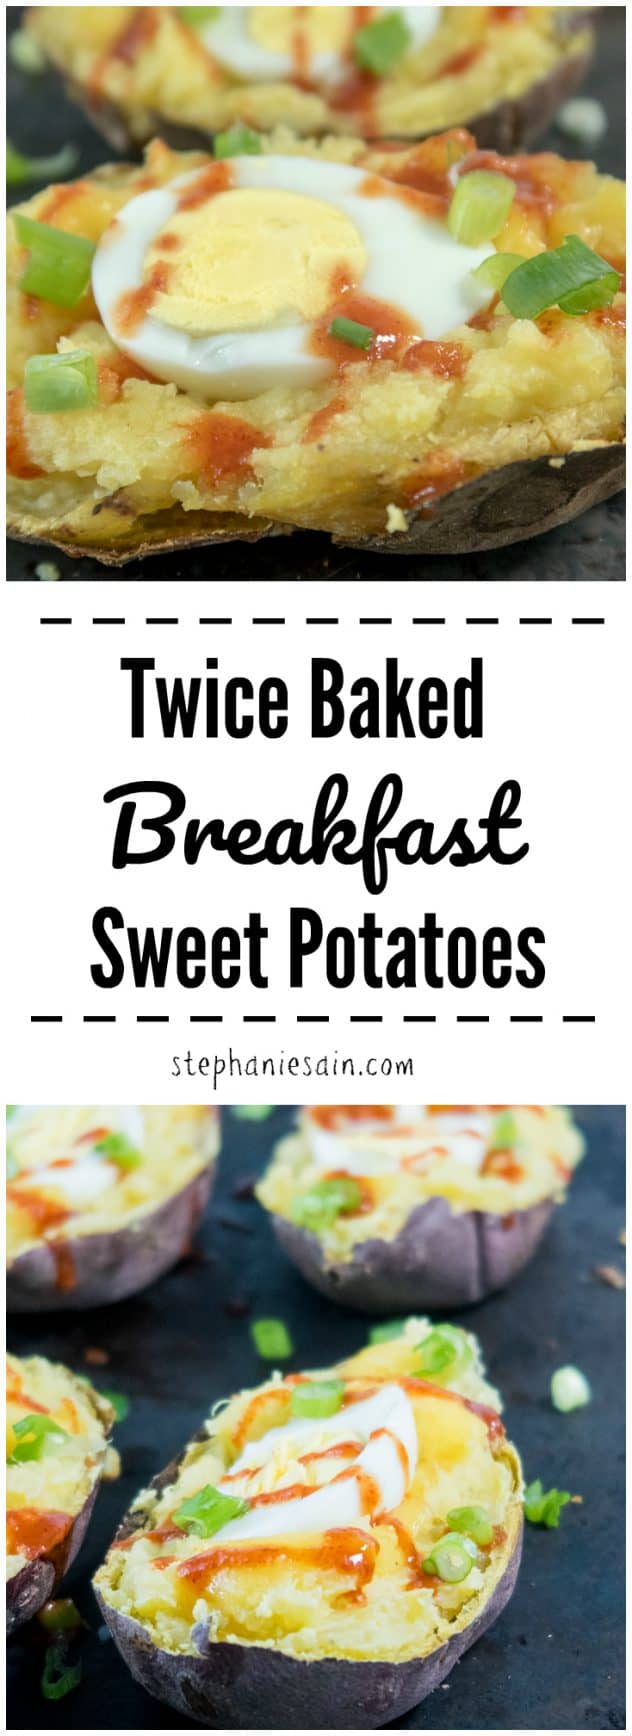 These Twice Baked Breakfast Sweet Potatoes are slightly sweet, smoky and perfect for a special breakfast or brunch. Vegetarian & Gluten Free.